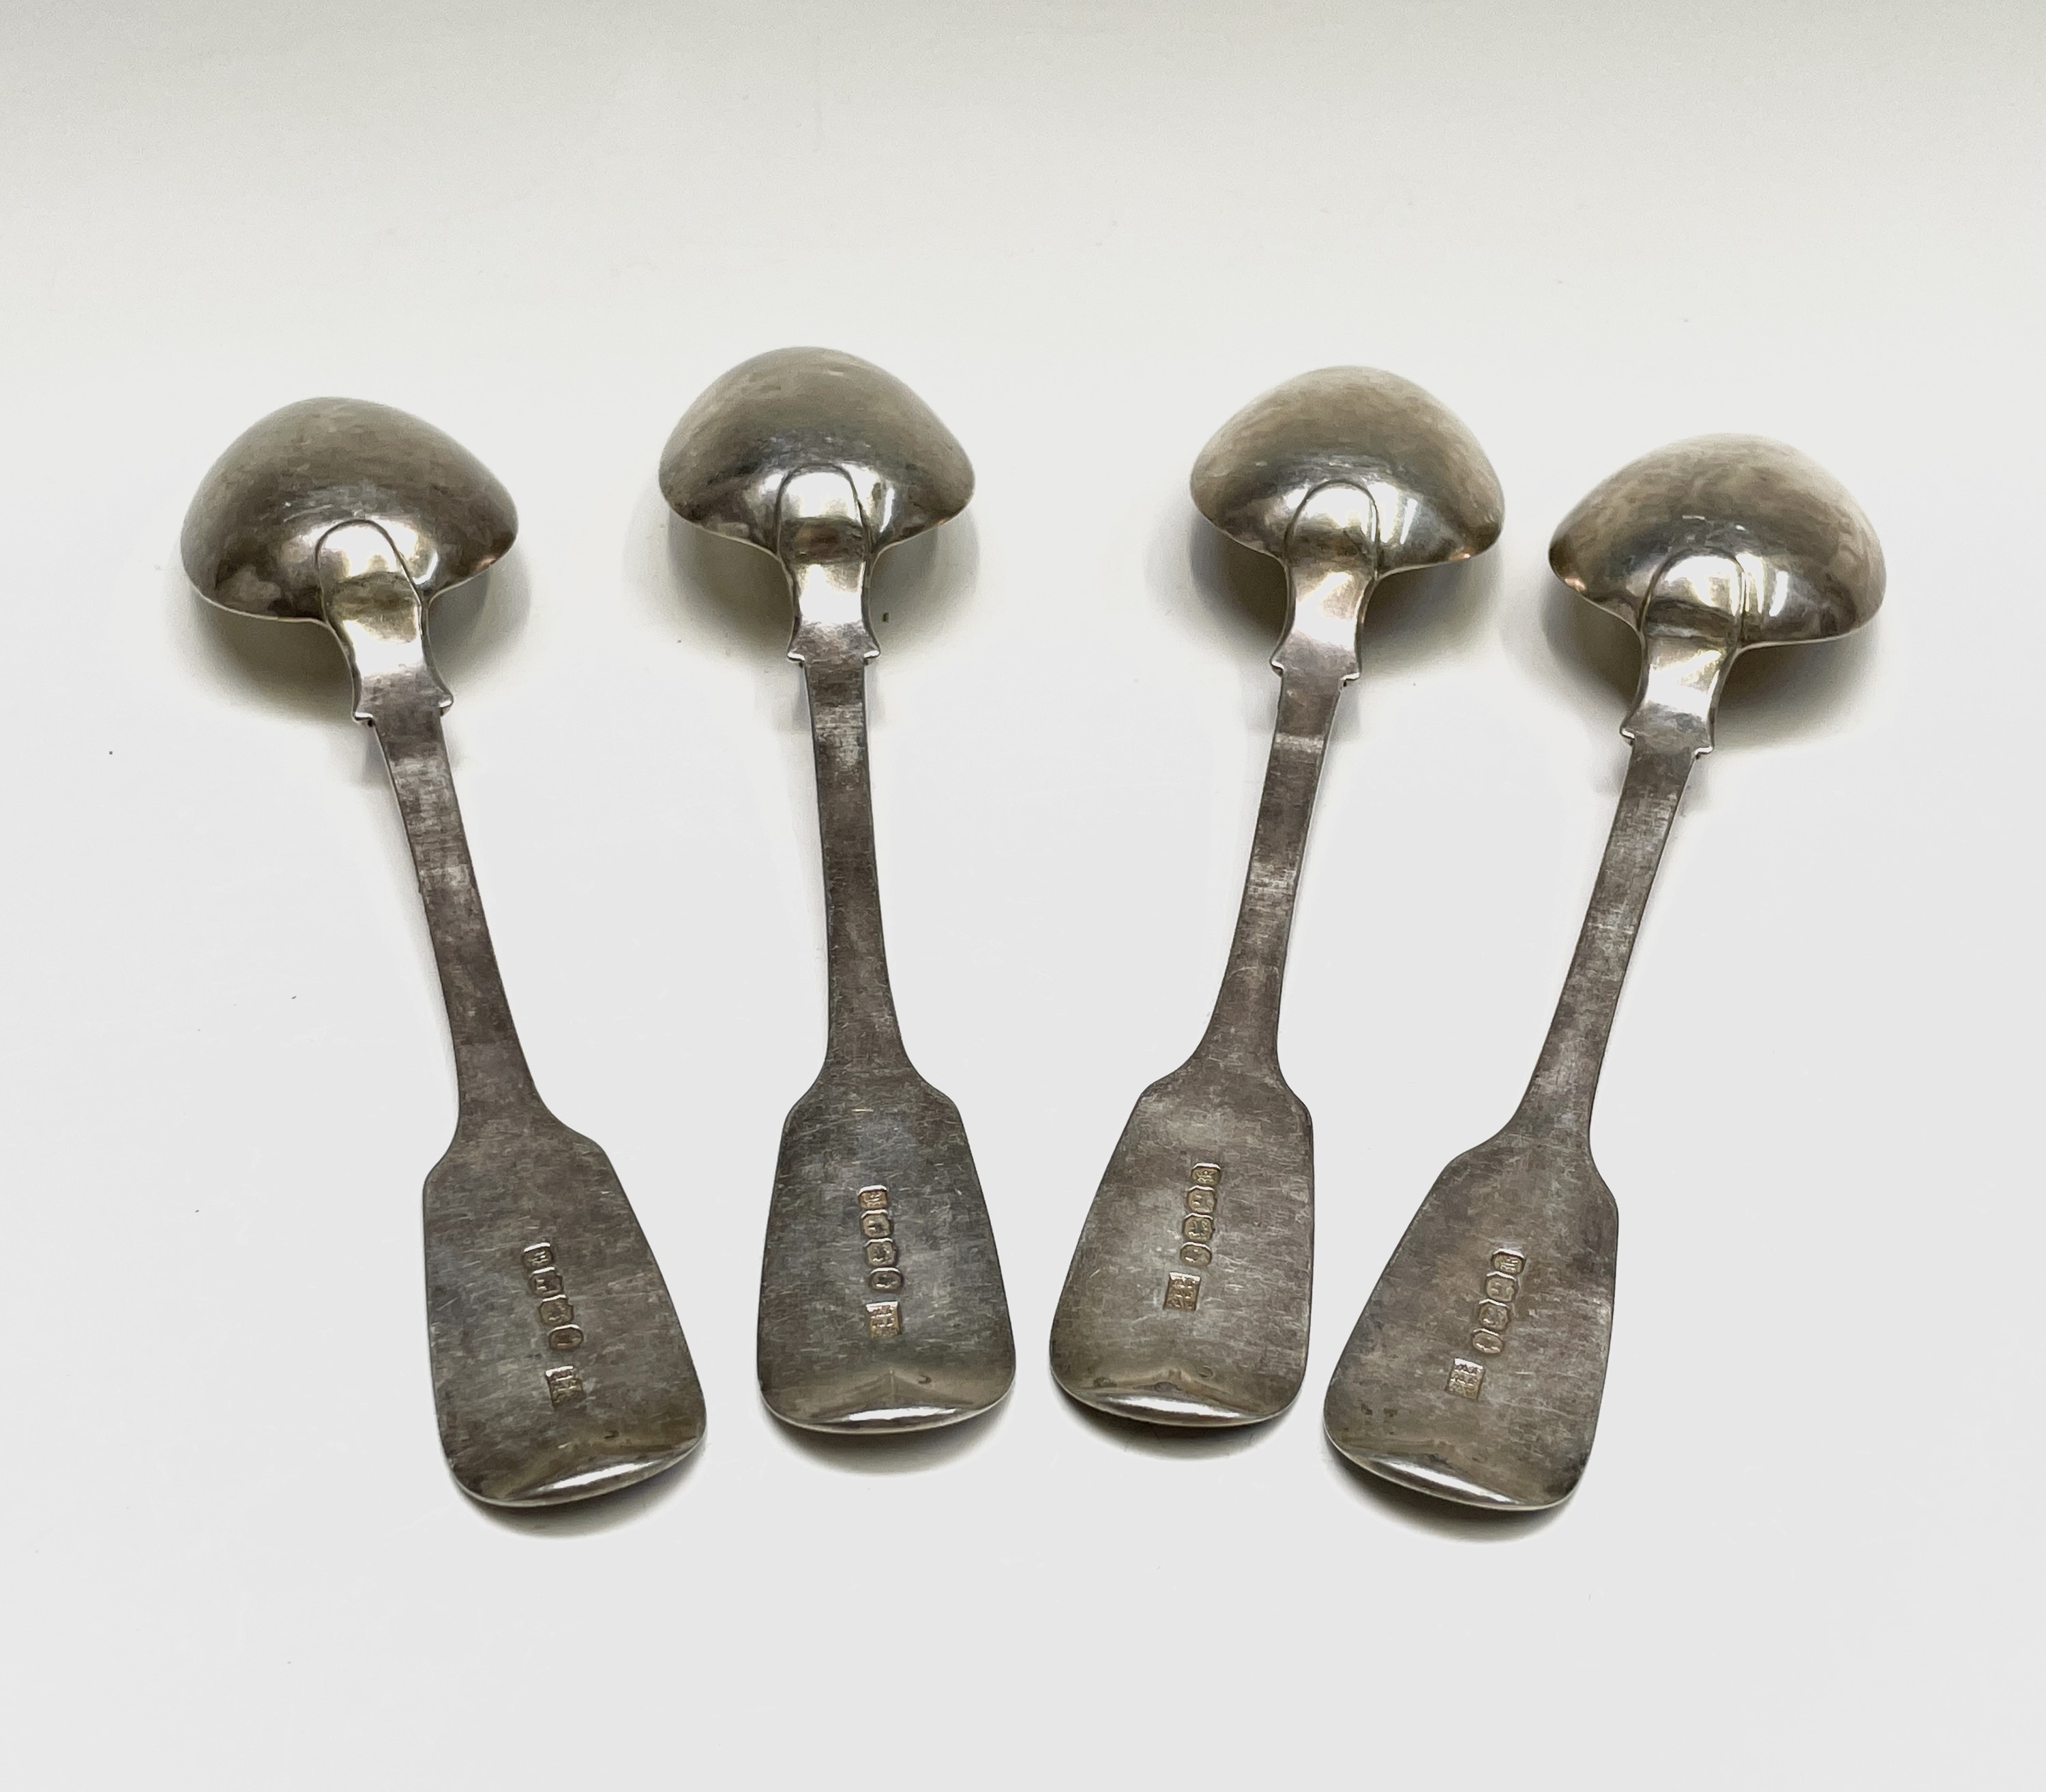 Four Exeter plain fiddle pattern silver tablespoons by Robert Williams & Sons (Robert, James & - Image 4 of 13